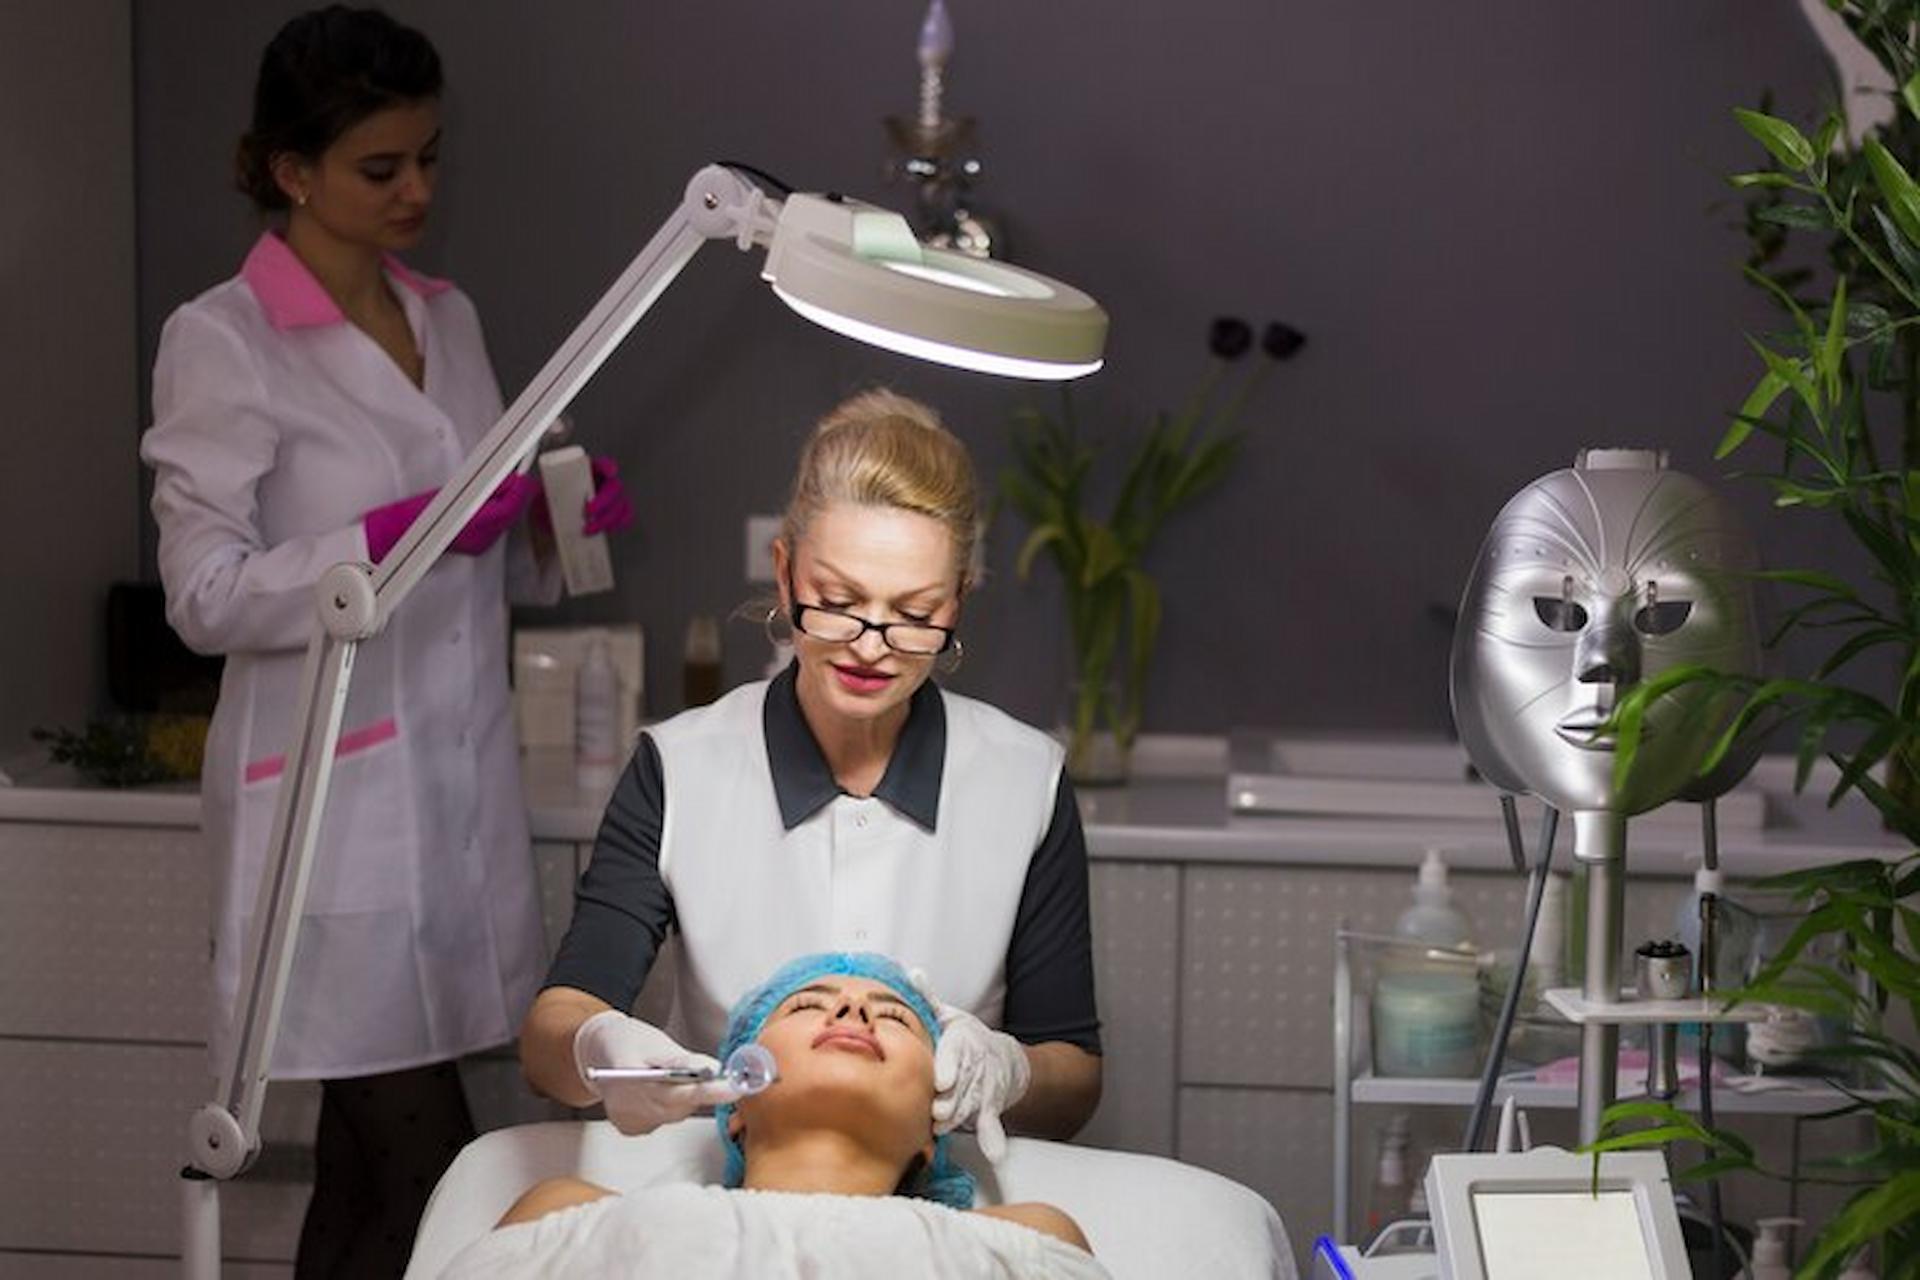 Is It Safe To Undergo Aesthetic Treatments For All Skin Types?